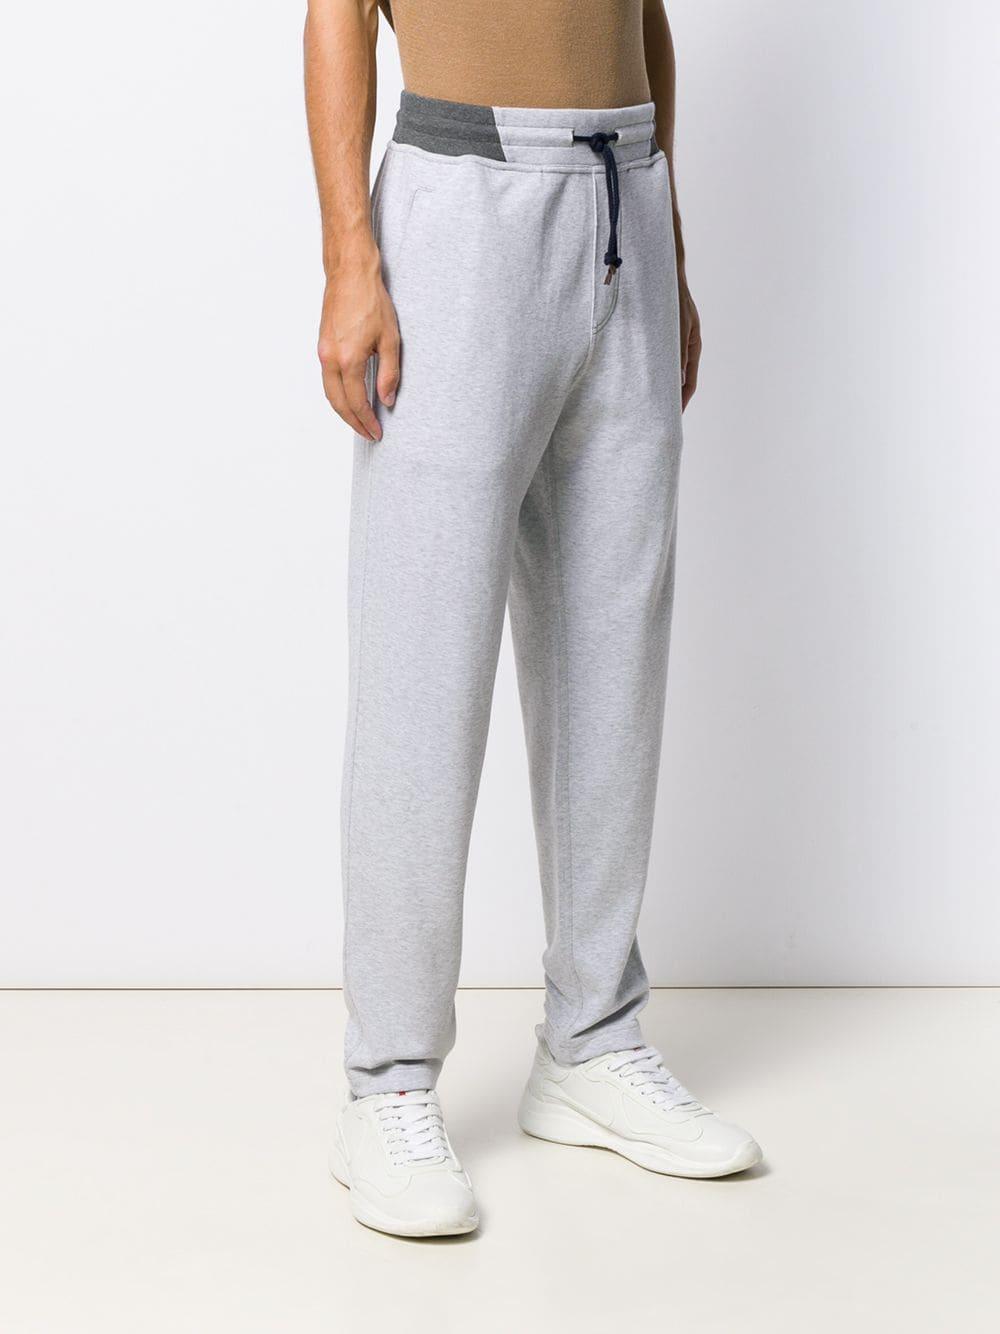 Brunello Cucinelli Track Pants in Grey (Gray) for Men - Lyst